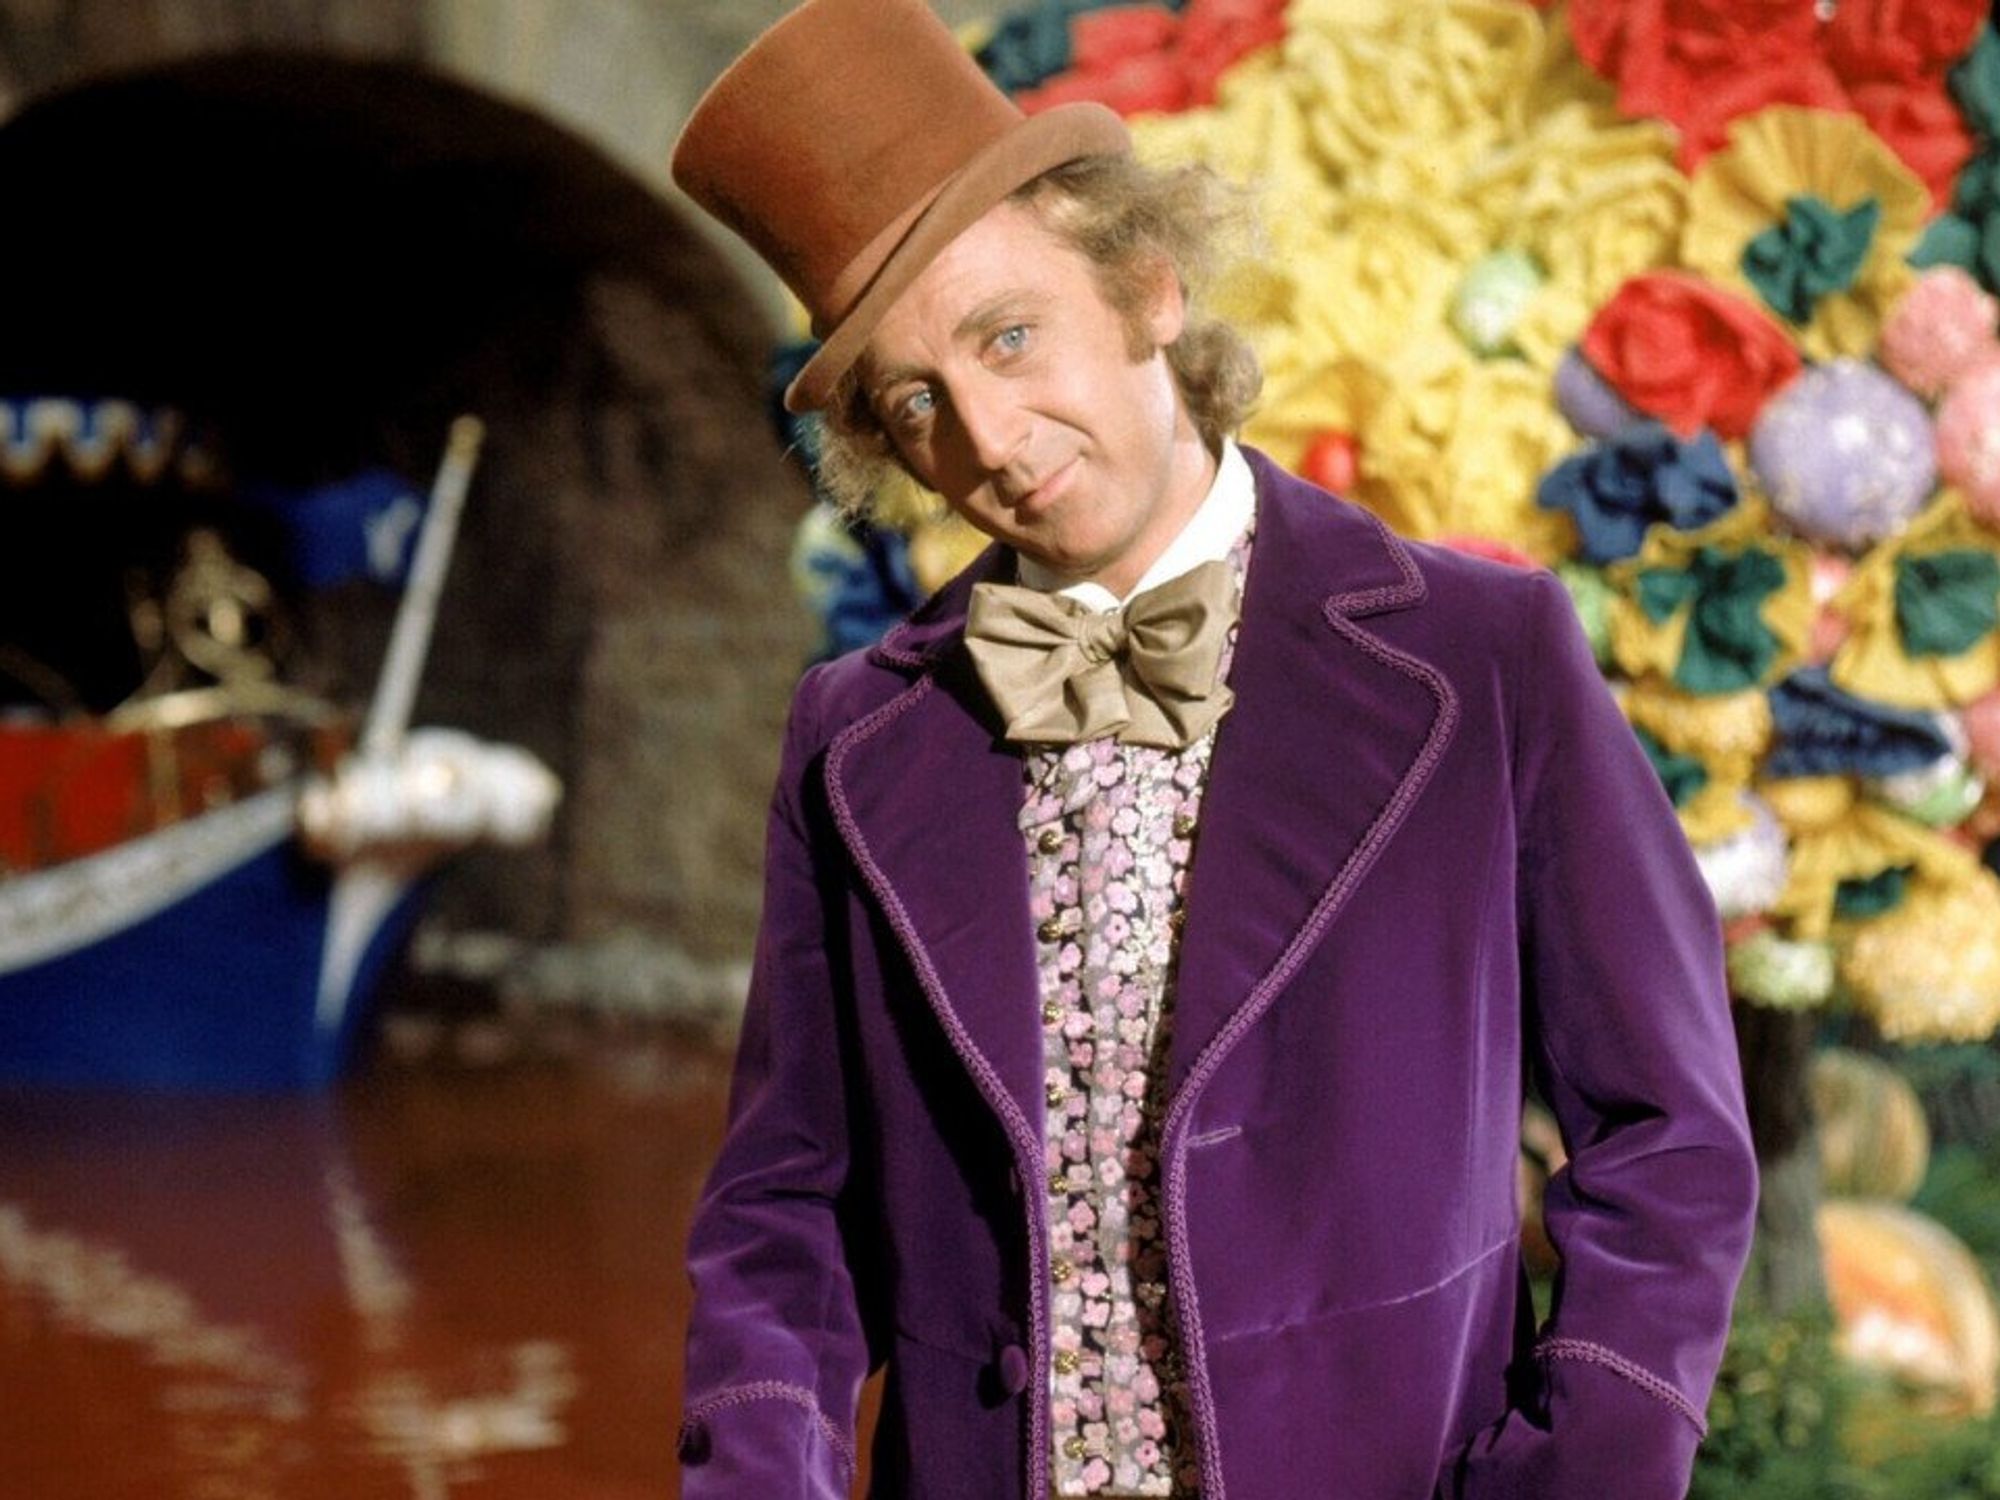 Dallas bar famous for pop-ups unveils new one with Willy Wonka theme -  CultureMap Dallas